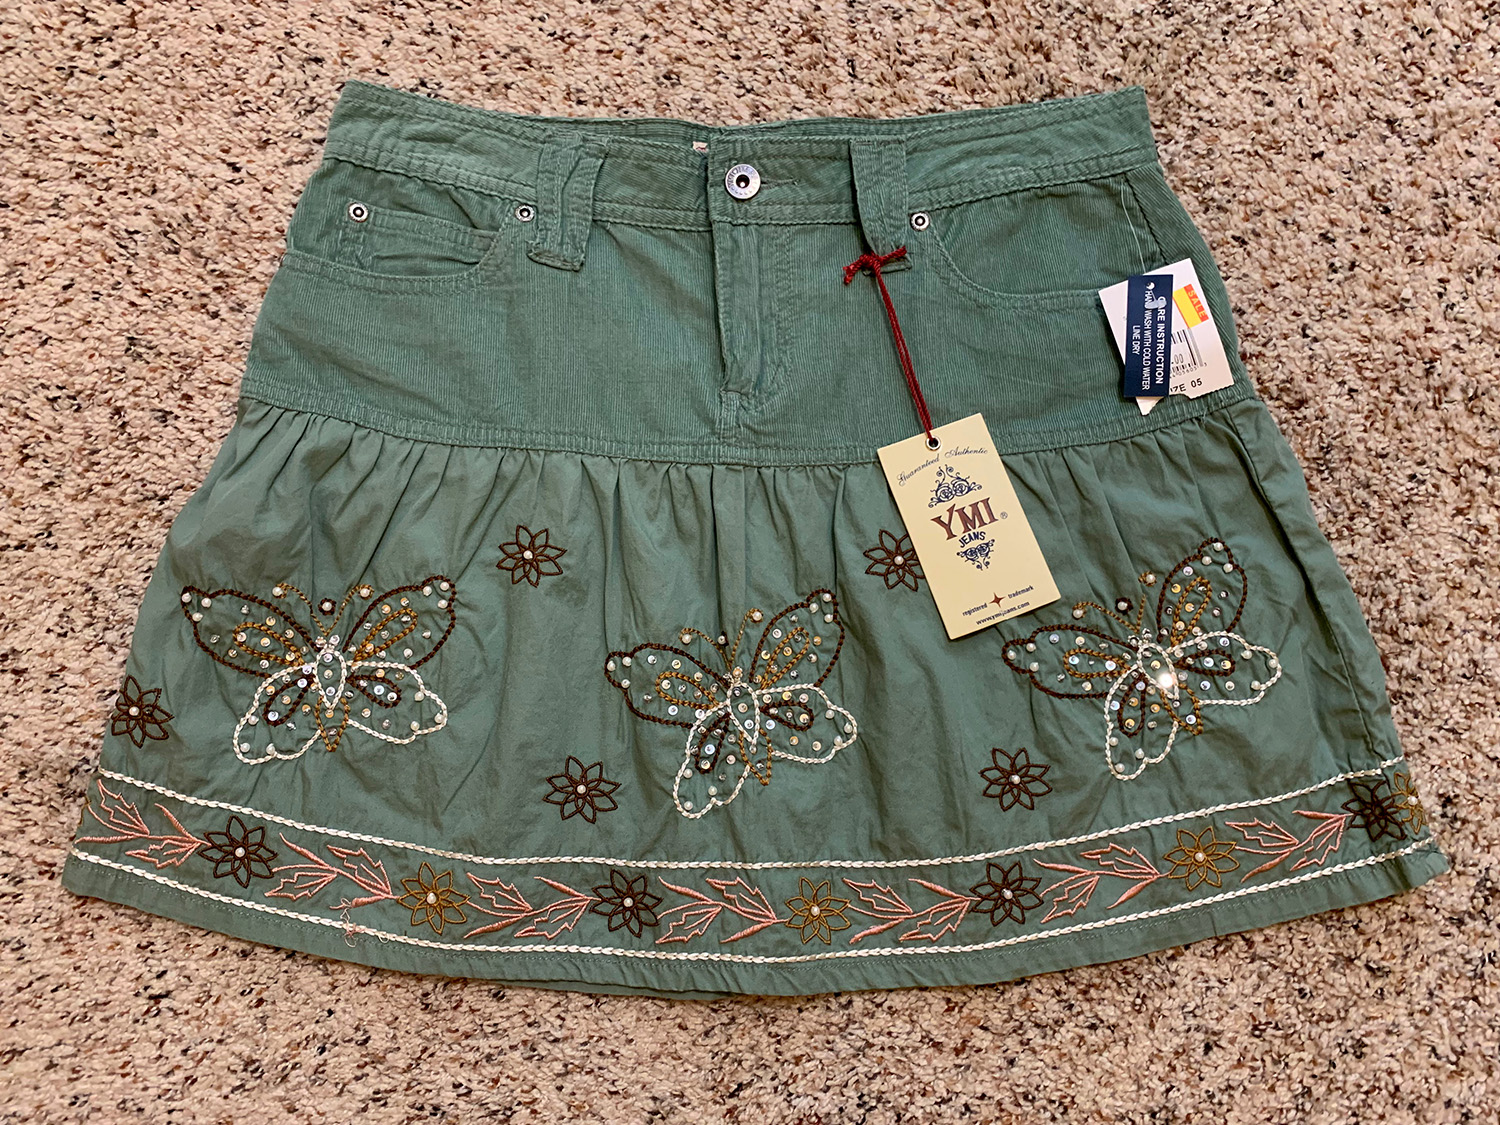 YMI Womens Corduroy Cotton Skirt New with Tags NWT Size 5 at The MenuGem Web Store